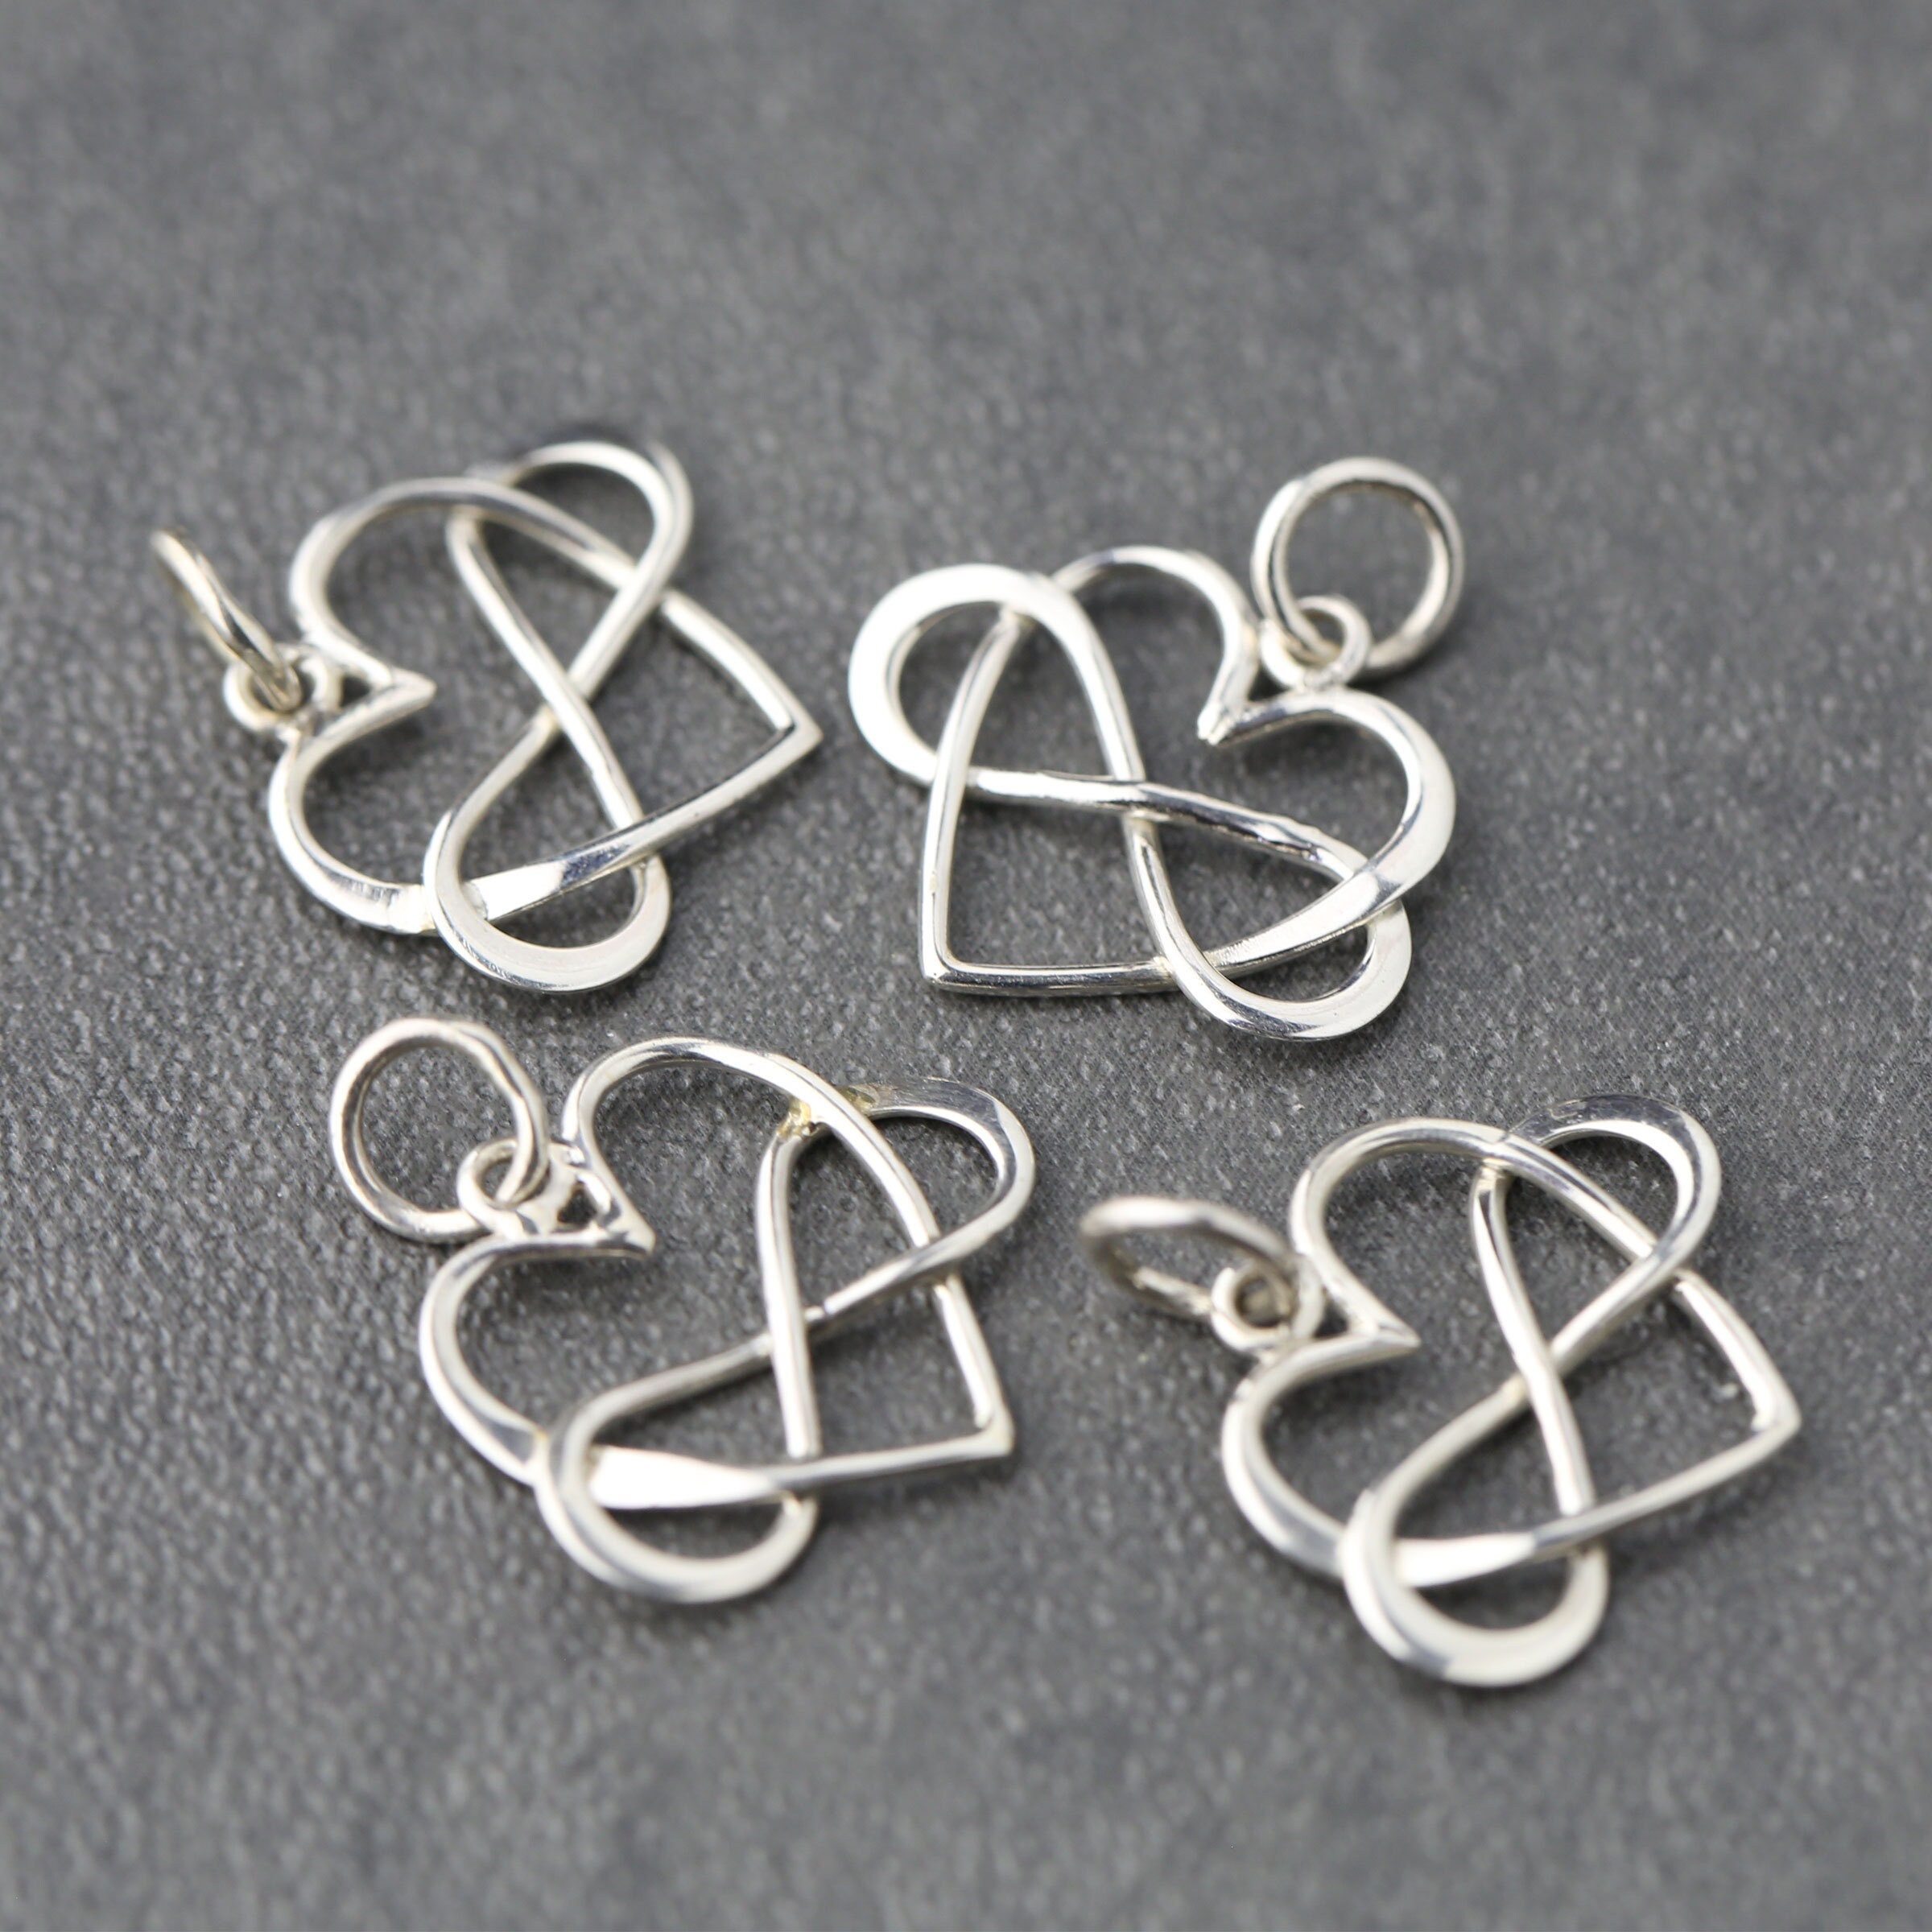 Cheap 8 Pieces Charm Making Jewelry Infinity Love Heart 27x22mm for DIY  Jewelry Findings Hand Made craft B13990